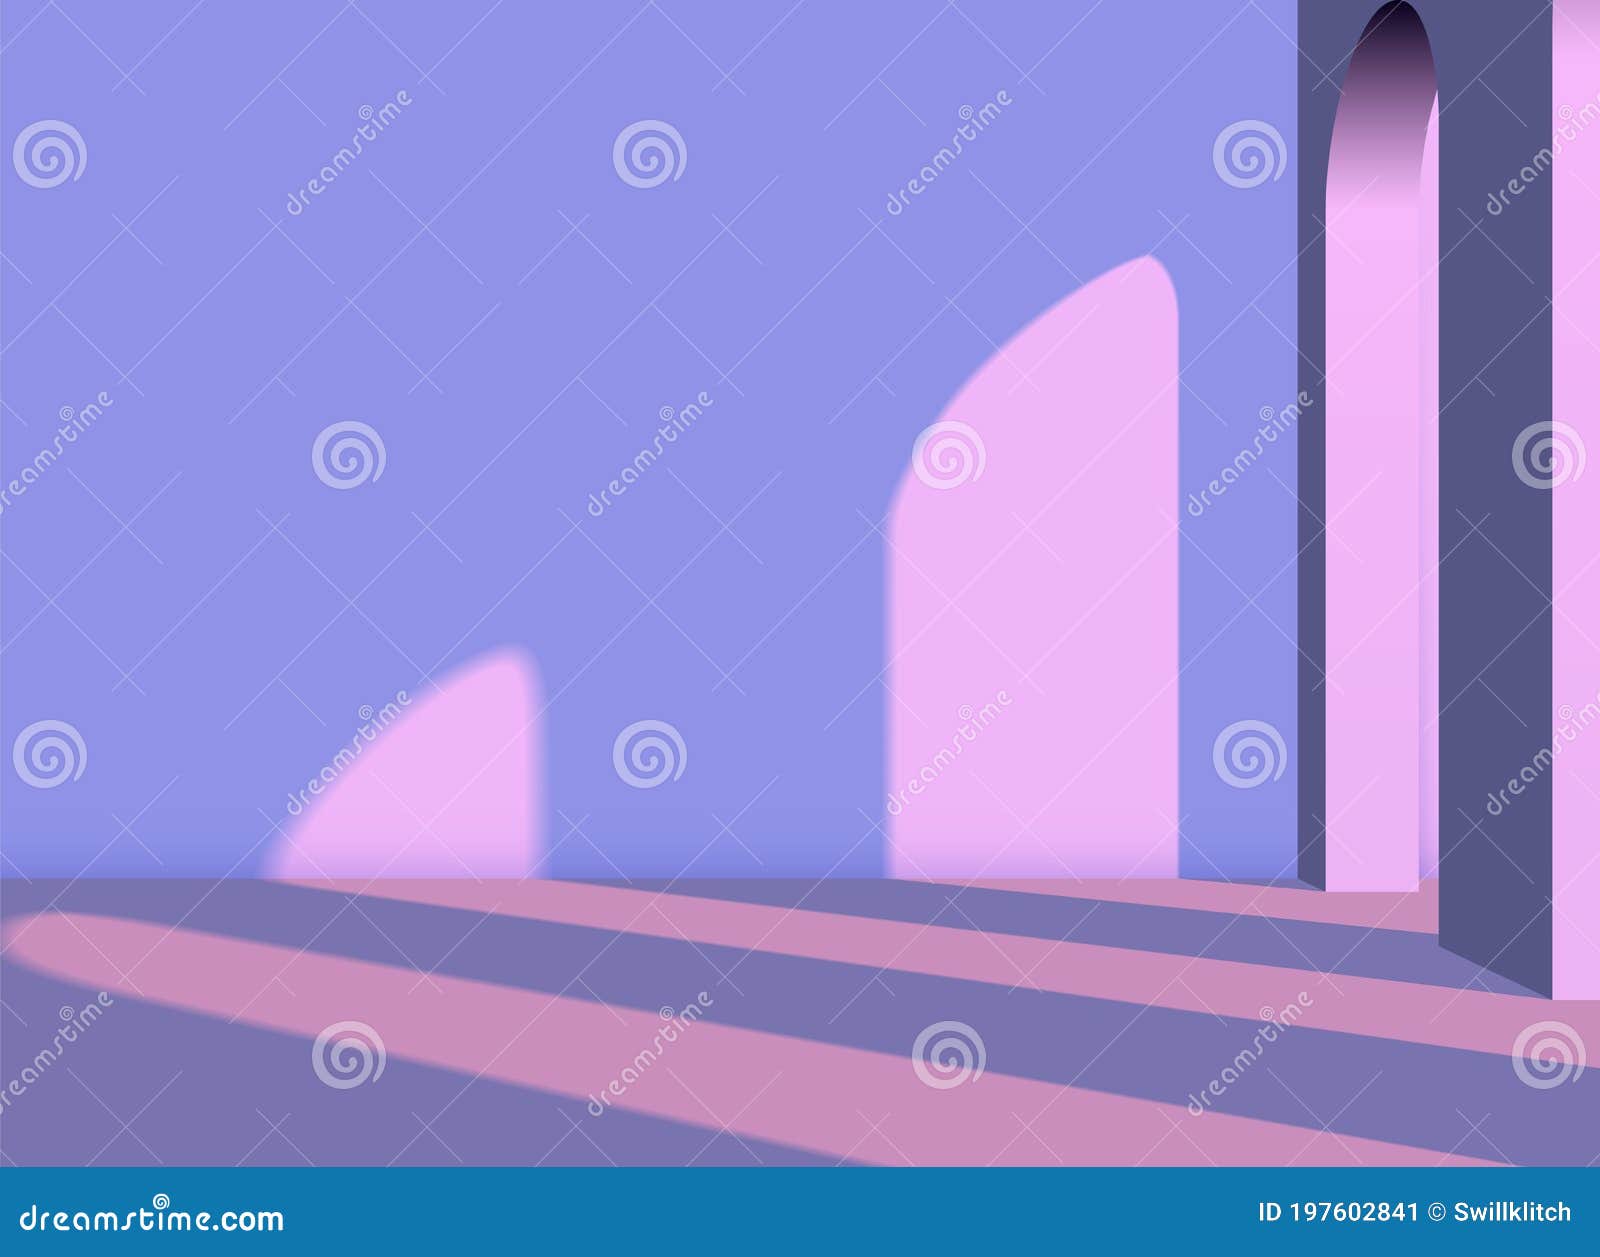 abstract vaporwave architectural 3d background with arches and columns in the pink room with violet shadows